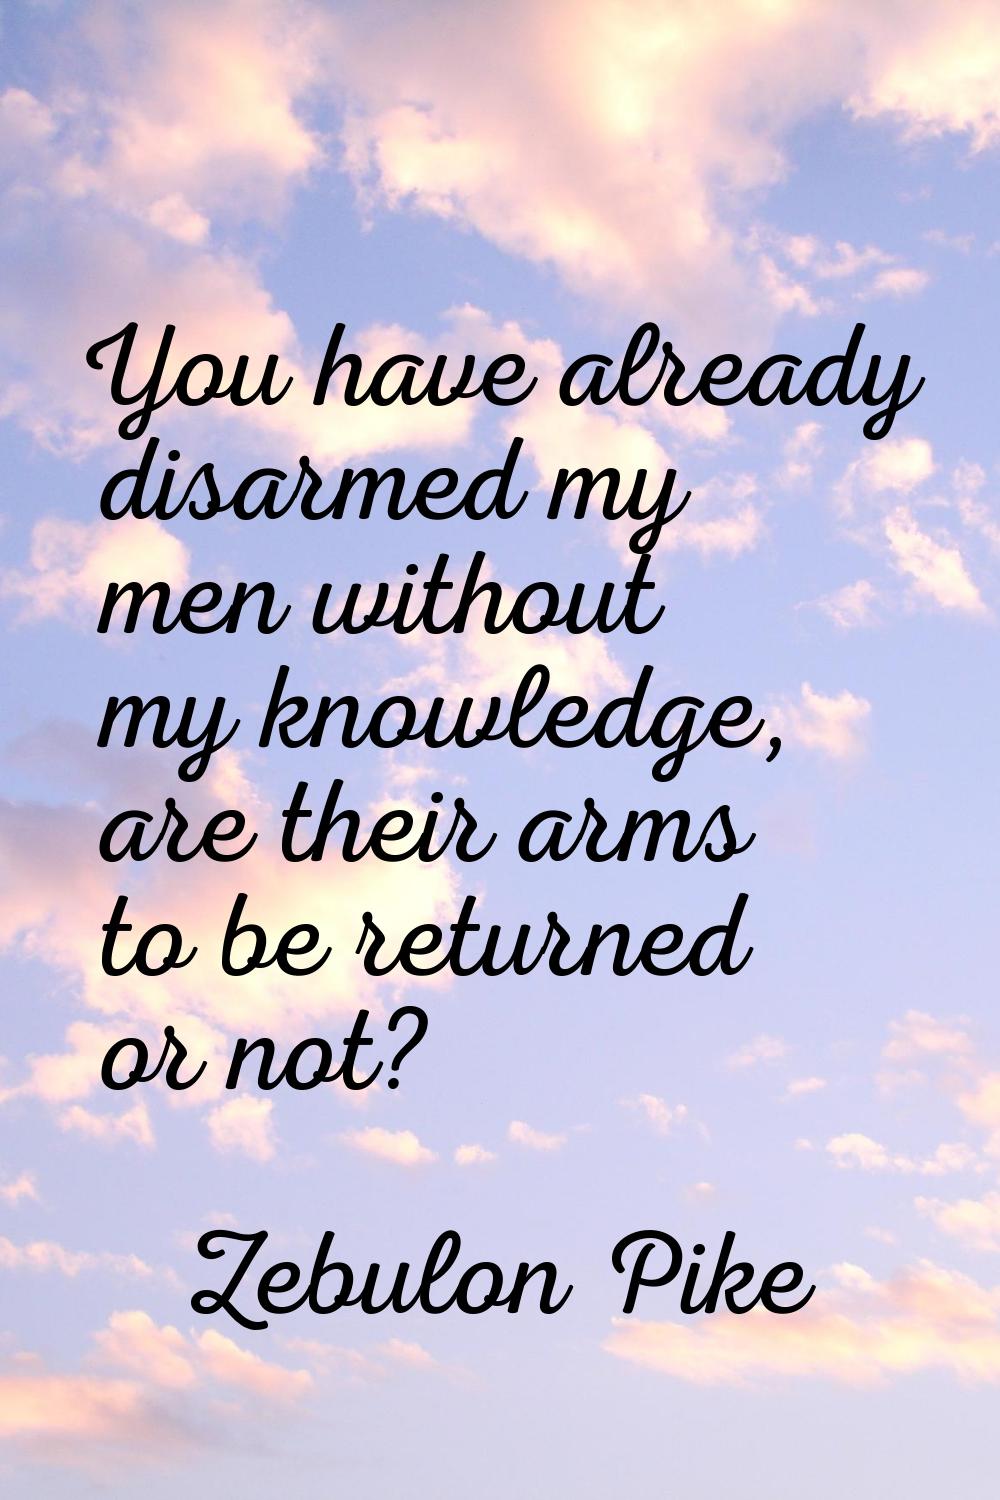 You have already disarmed my men without my knowledge, are their arms to be returned or not?